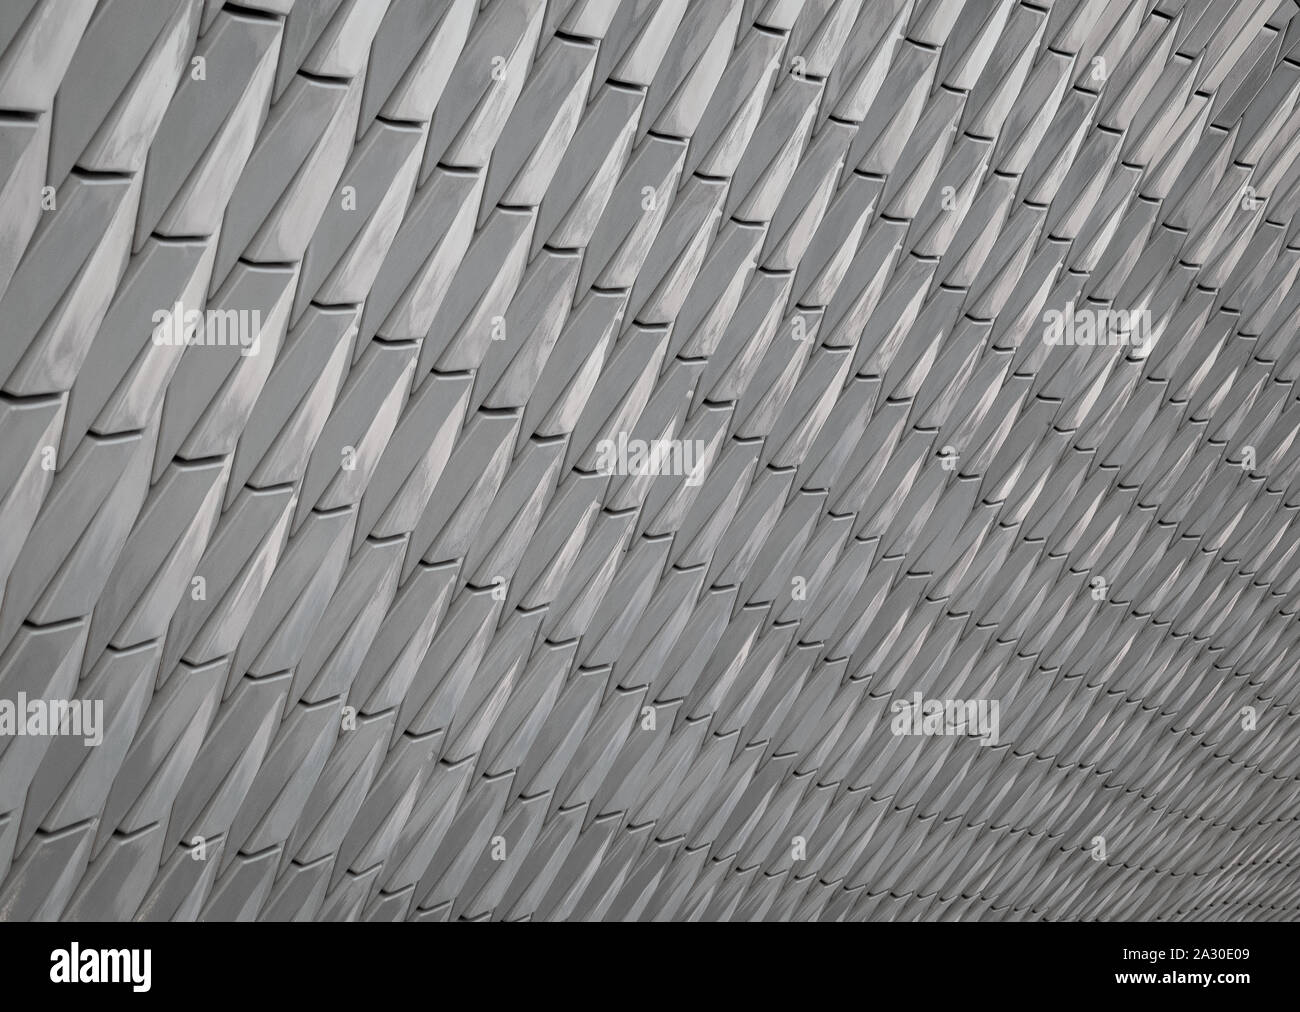 Pearl gray abstract background with perspective. Tiled, scaly, flaky pattern Stock Photo